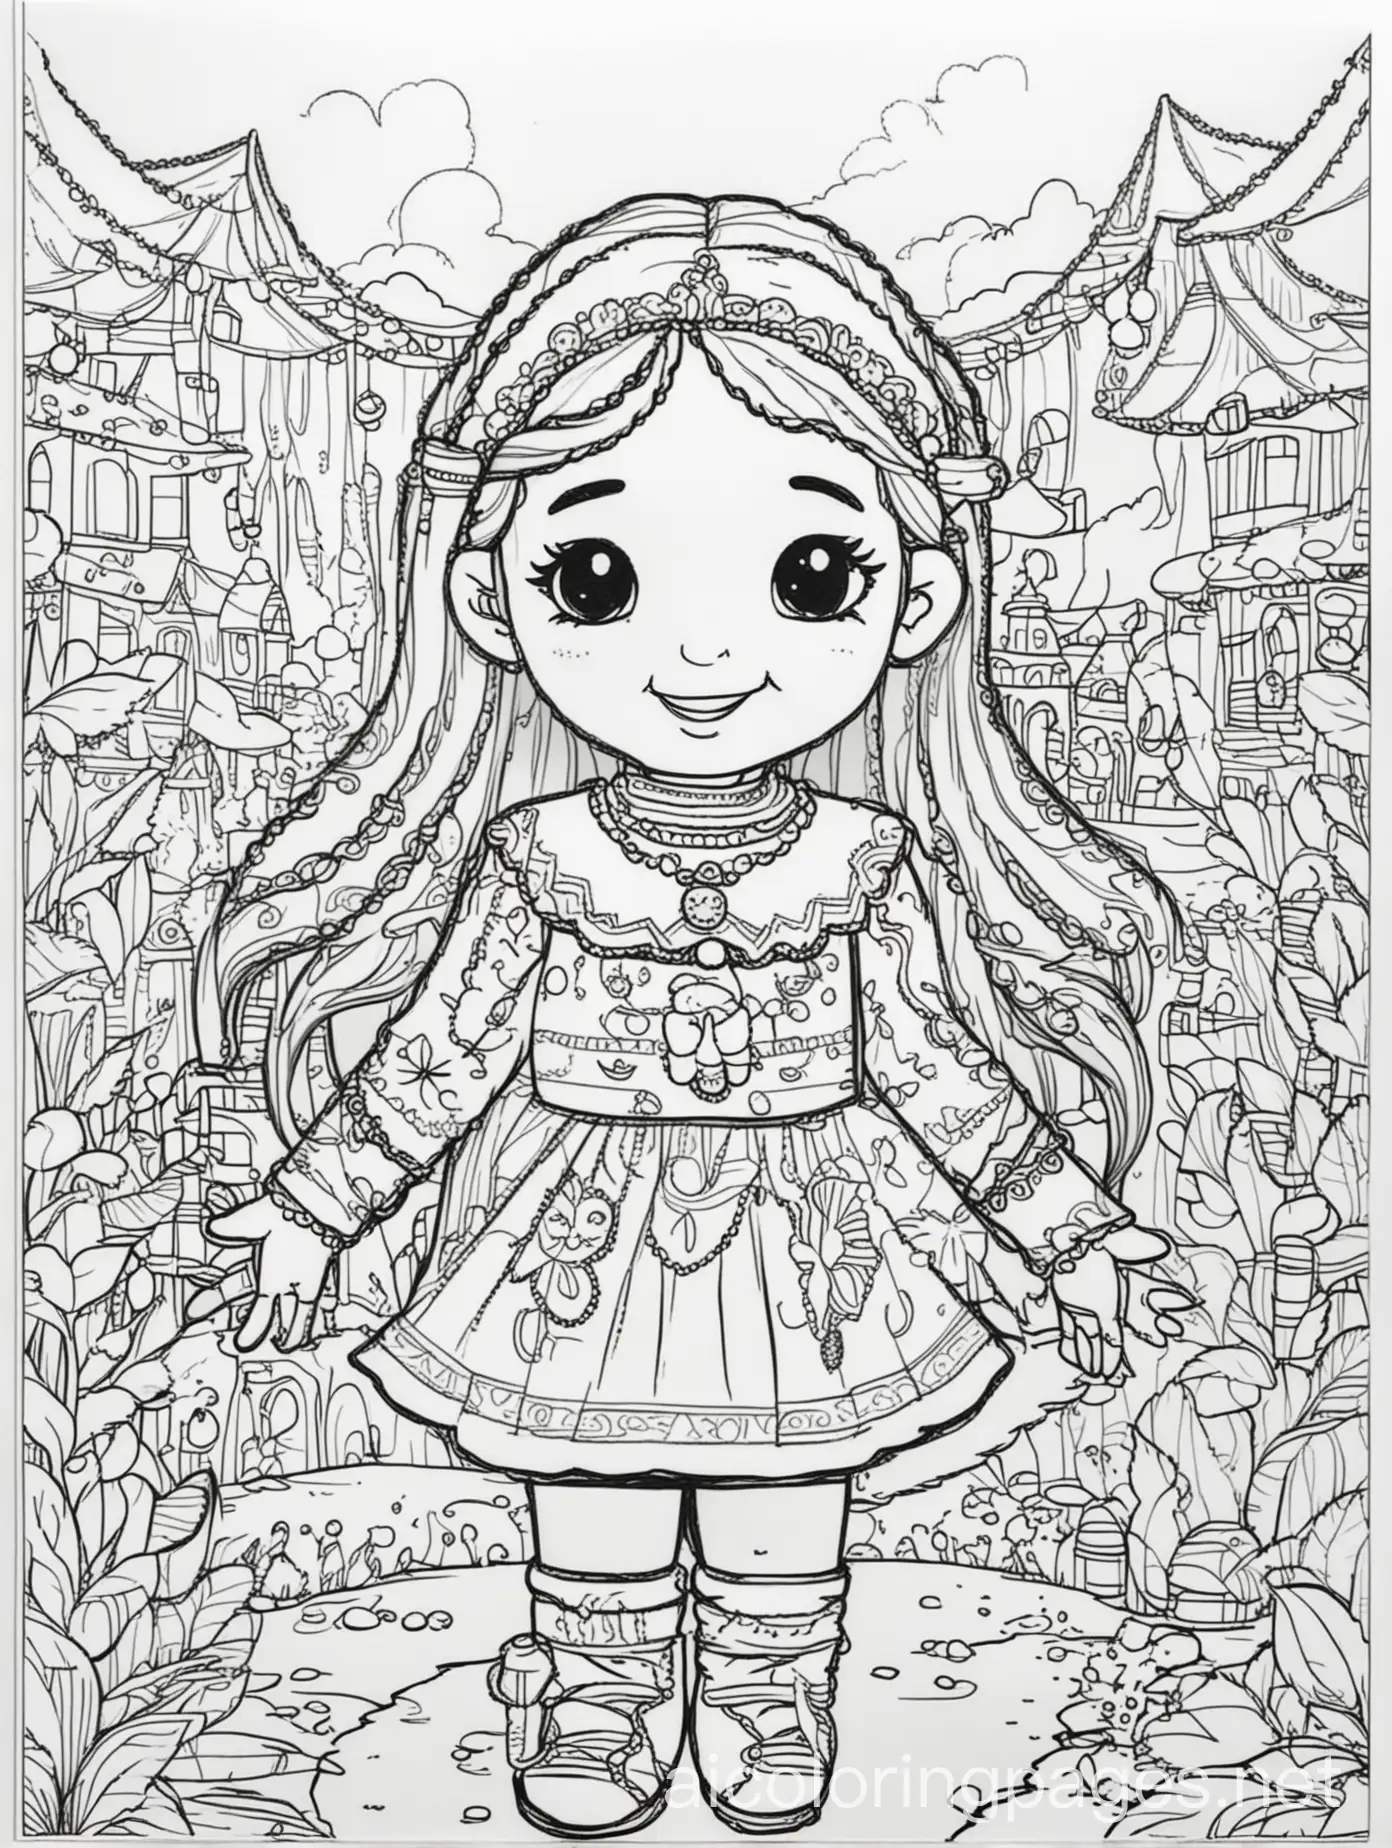 Kid's Fun. Festivals, Coloring Page, black and white, line art, white background, Simplicity, Ample White Space. The background of the coloring page is plain white to make it easy for young children to color within the lines. The outlines of all the subjects are easy to distinguish, making it simple for kids to color without too much difficulty